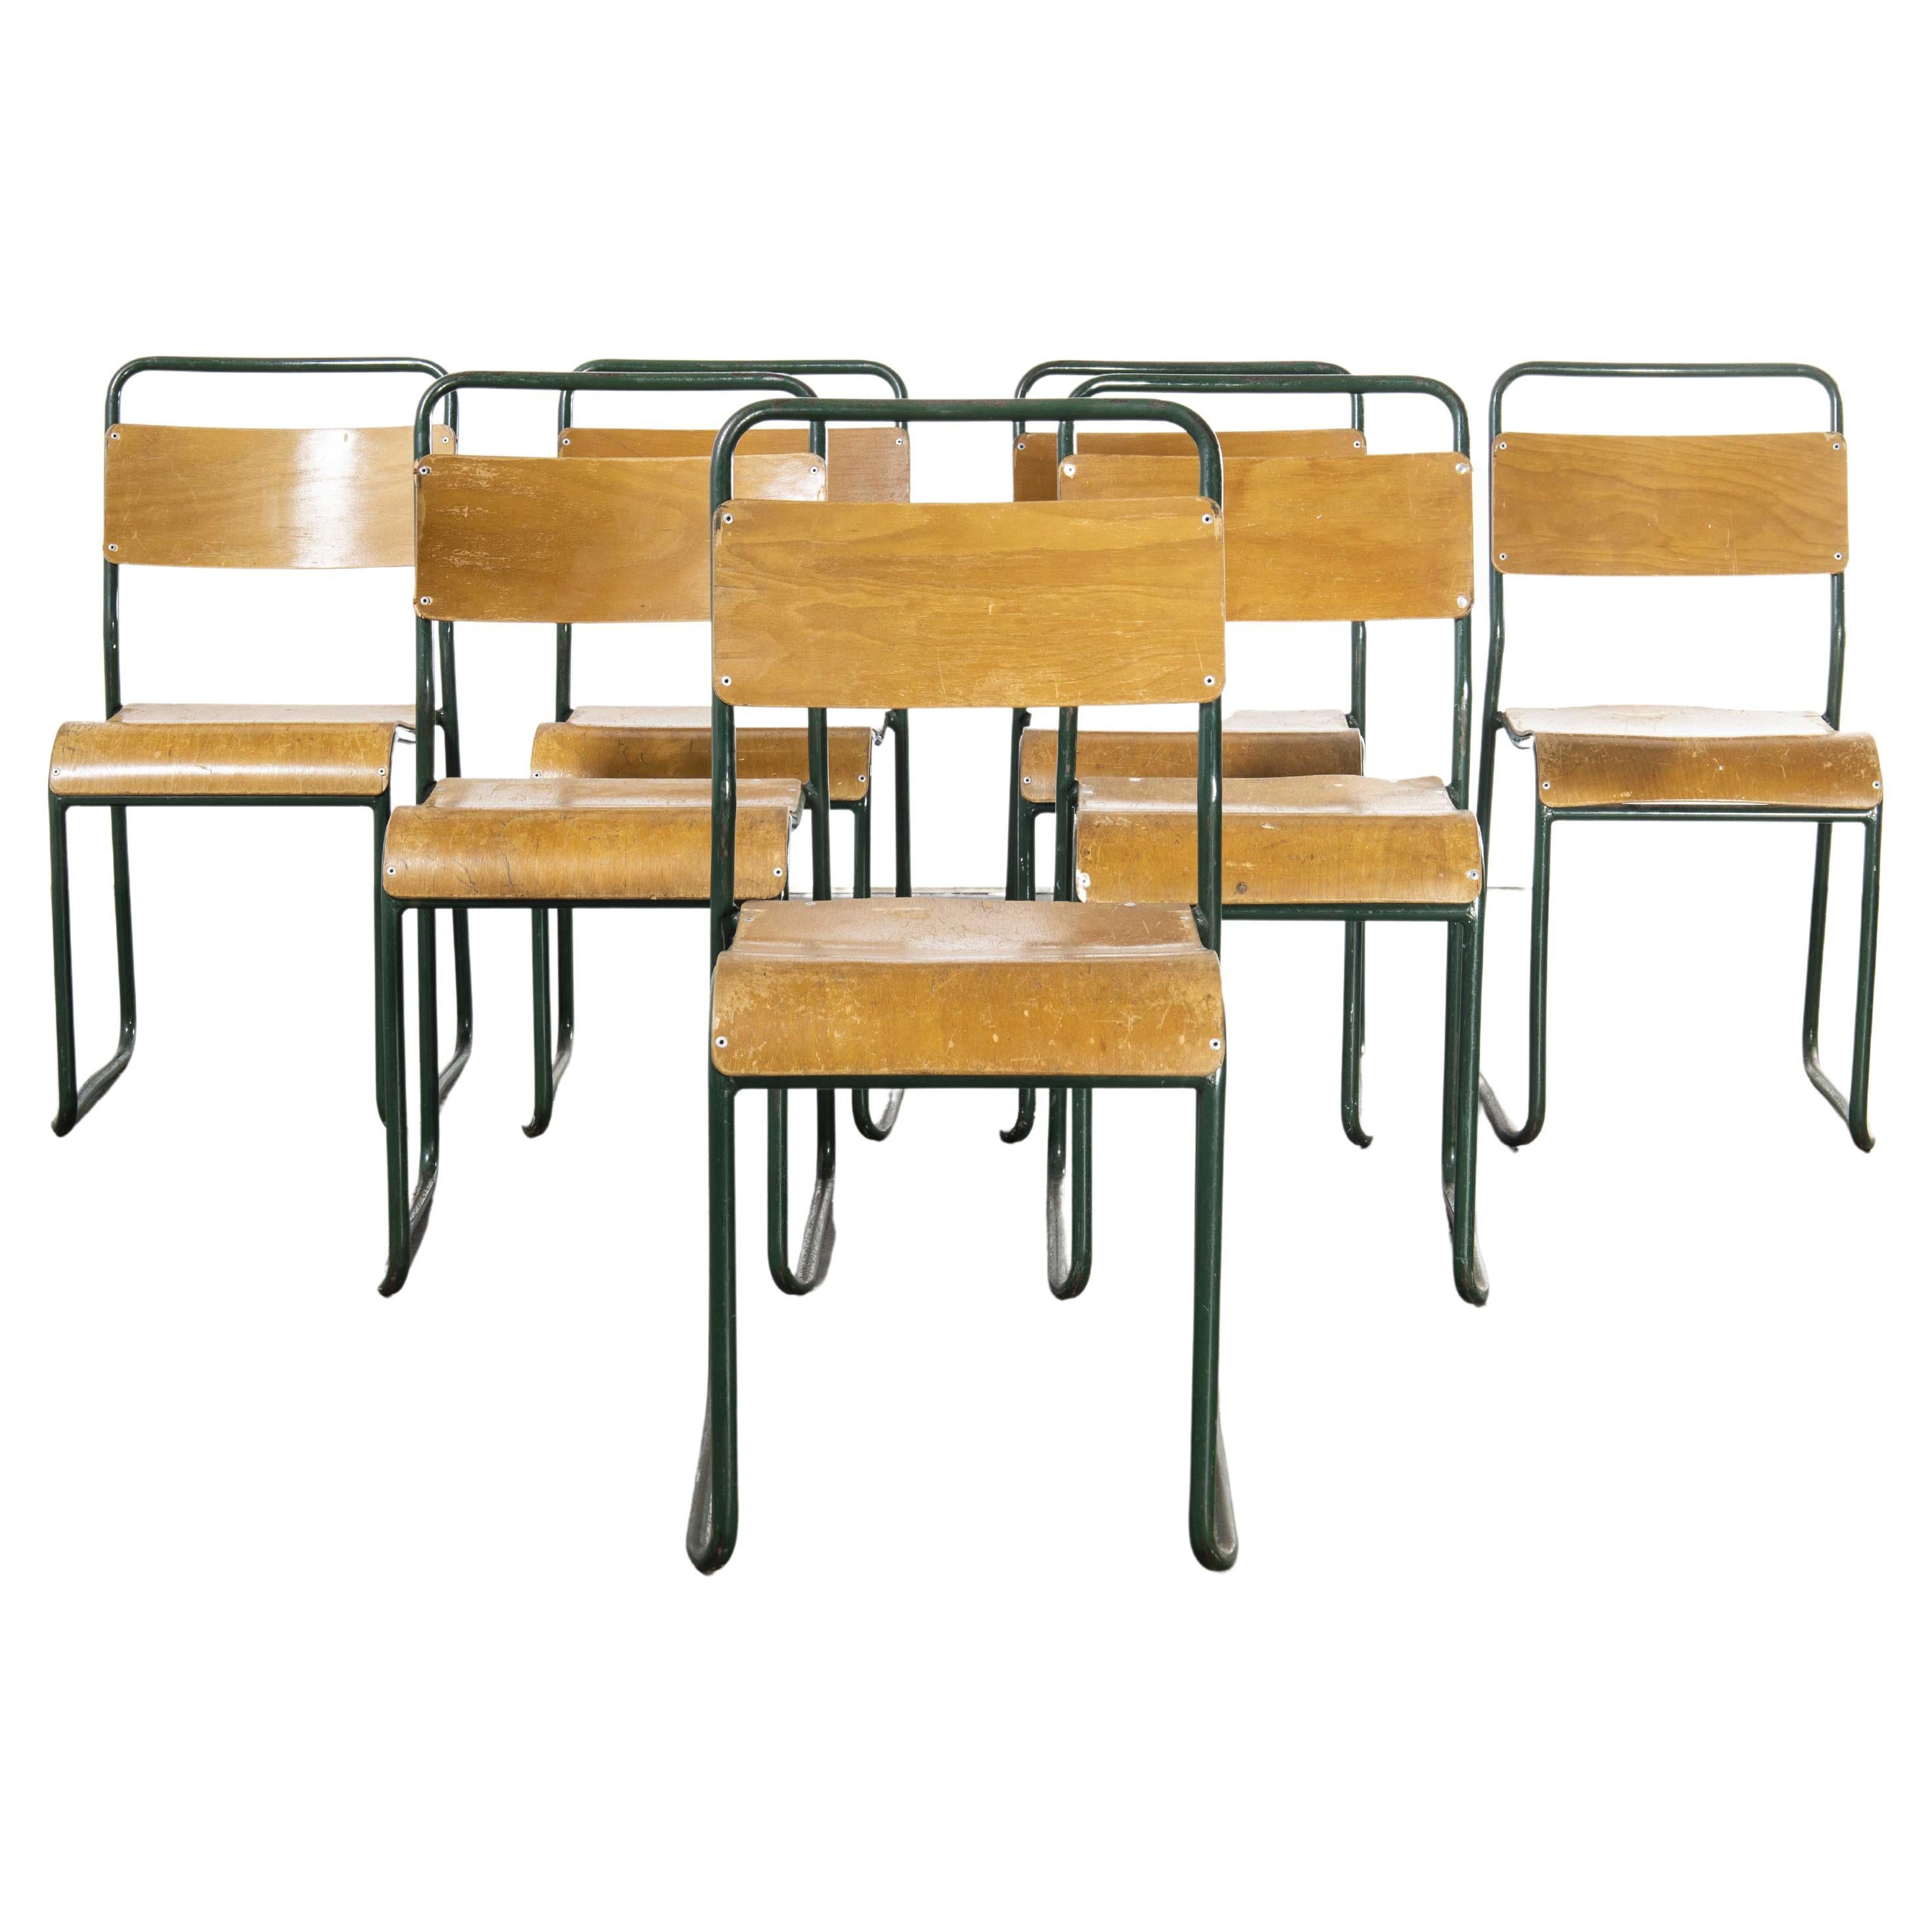 1940's COX Green Stacking Tubular Metal Dining Chair, Set of Seven